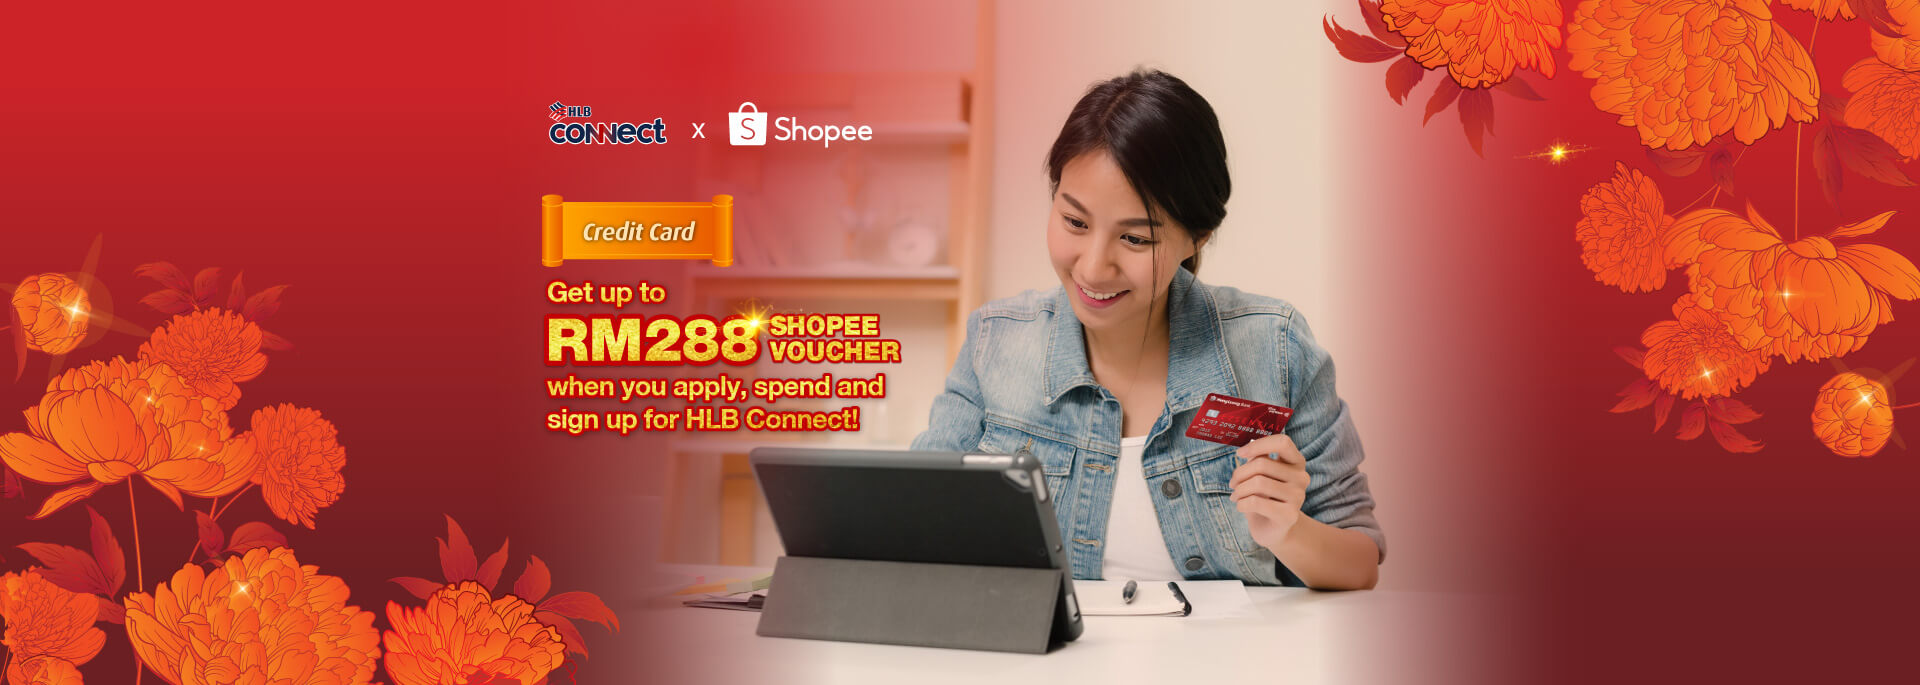 Greater Shopee rewards with your new HLB Credit Card!